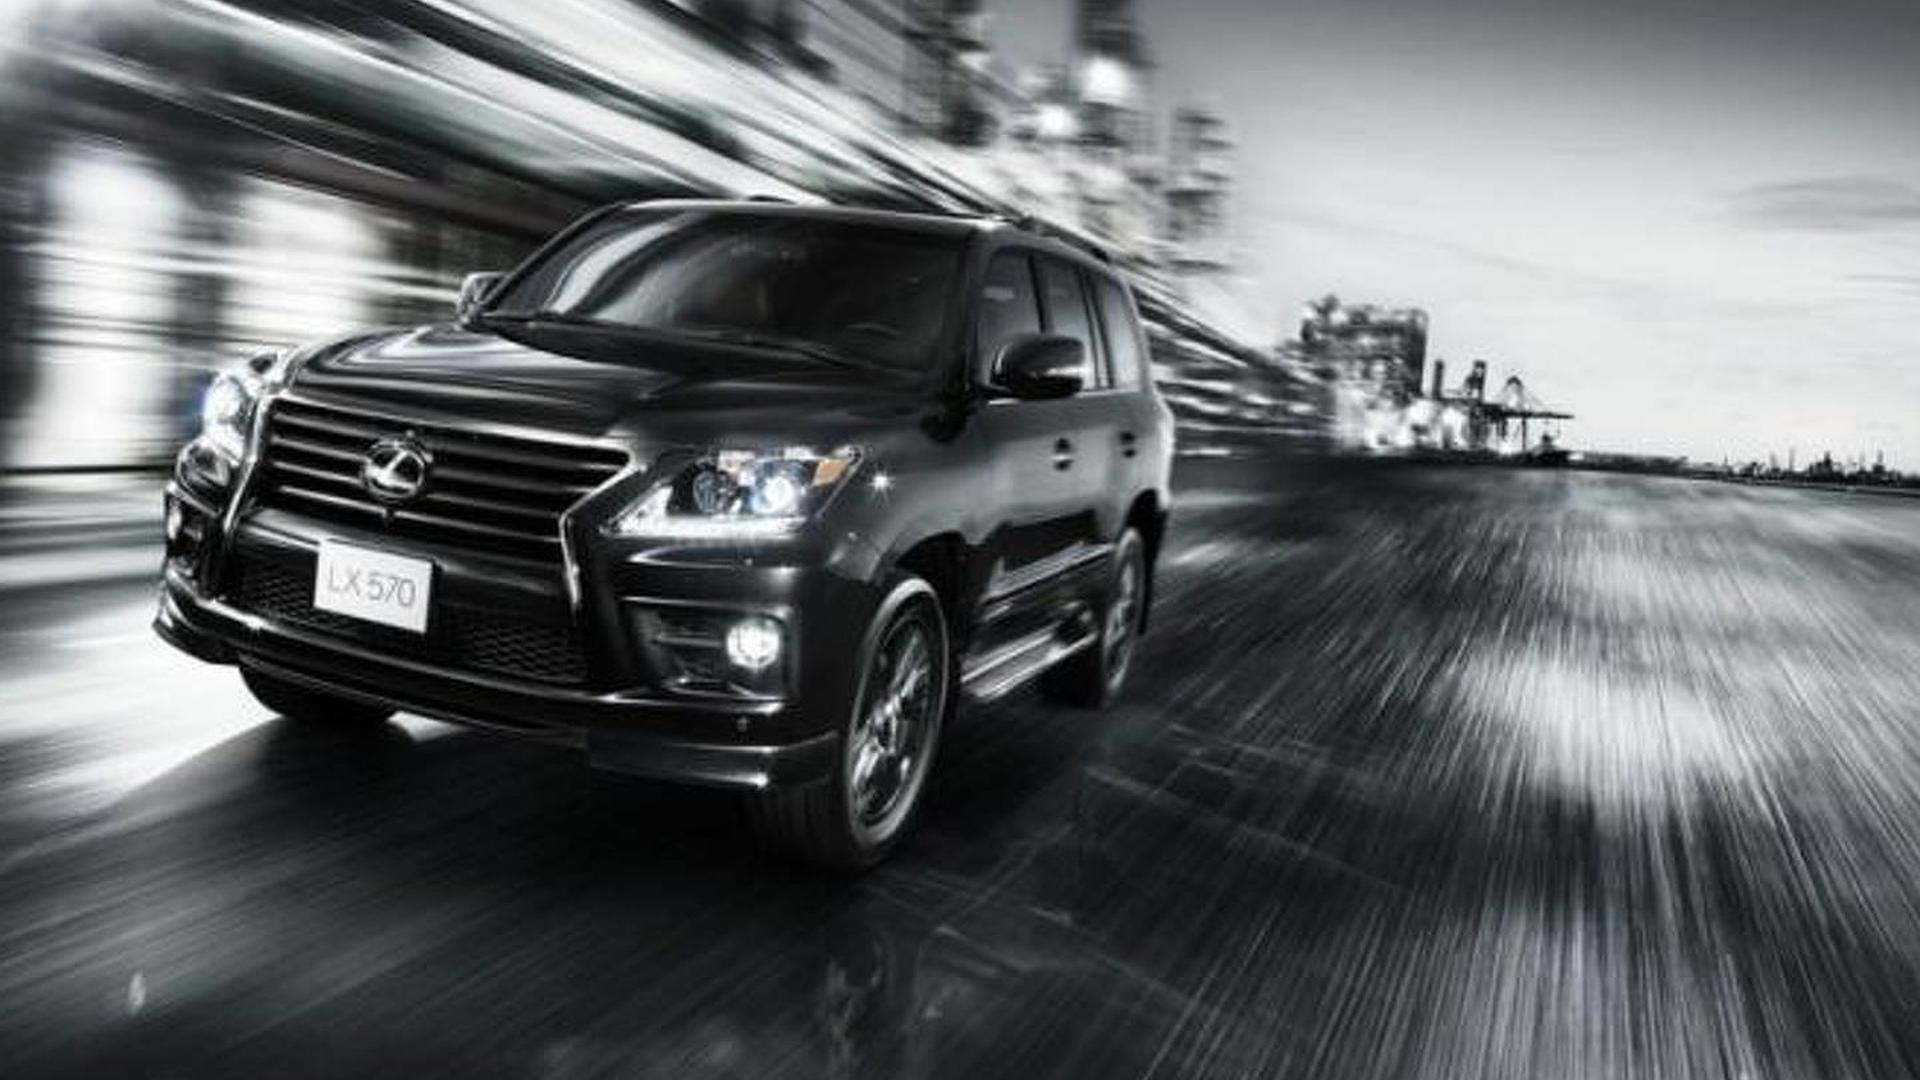 Lexus LX 570 Supercharger special edition announced with 450 bhp